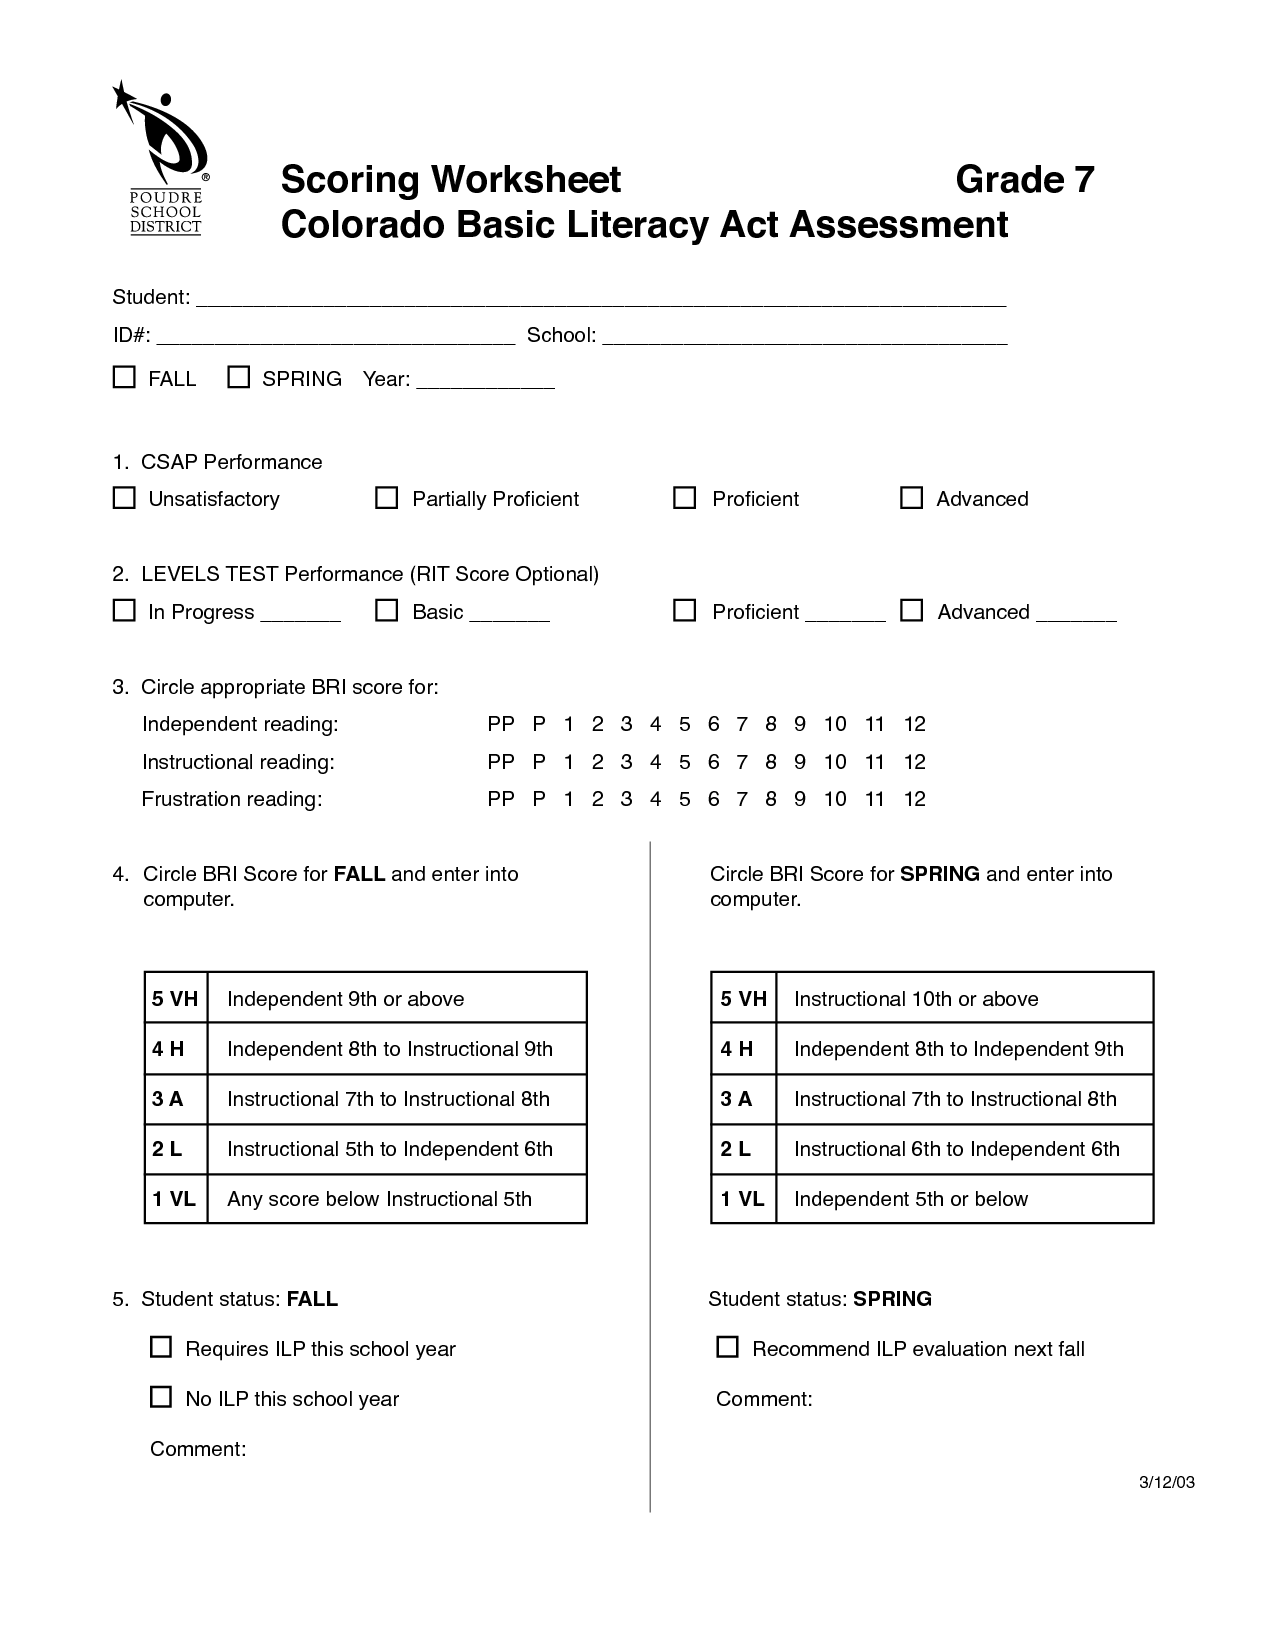 16 Best Images of 10th Grade Vocabulary Worksheets - 10th Grade Math